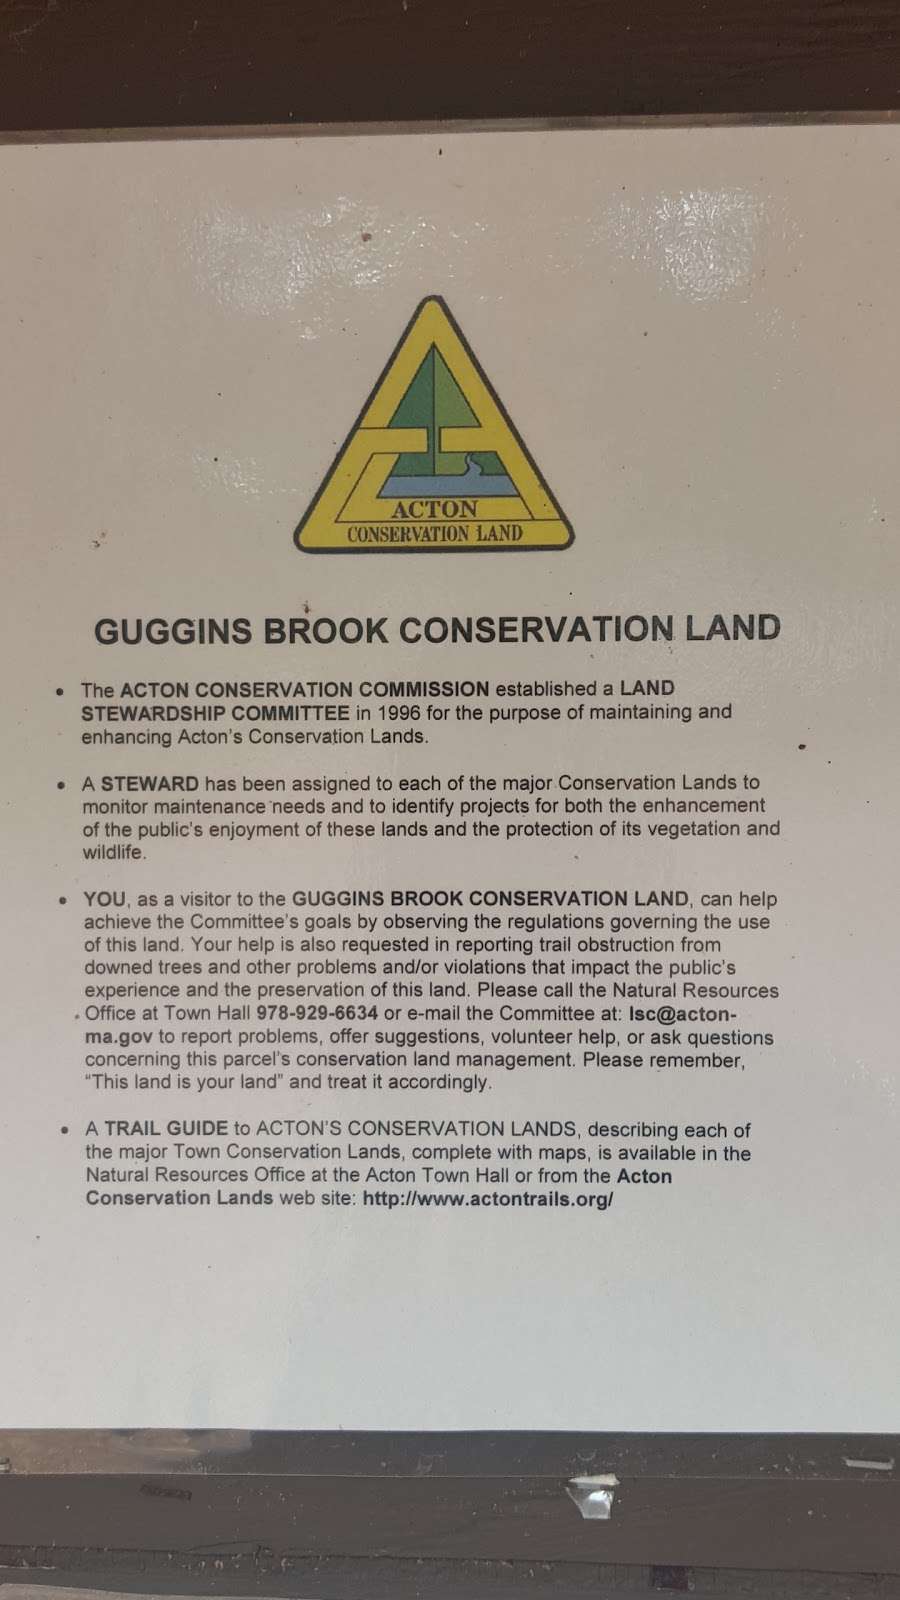 Guggins Brook Conservation Area | Acton, MA 01720, USA